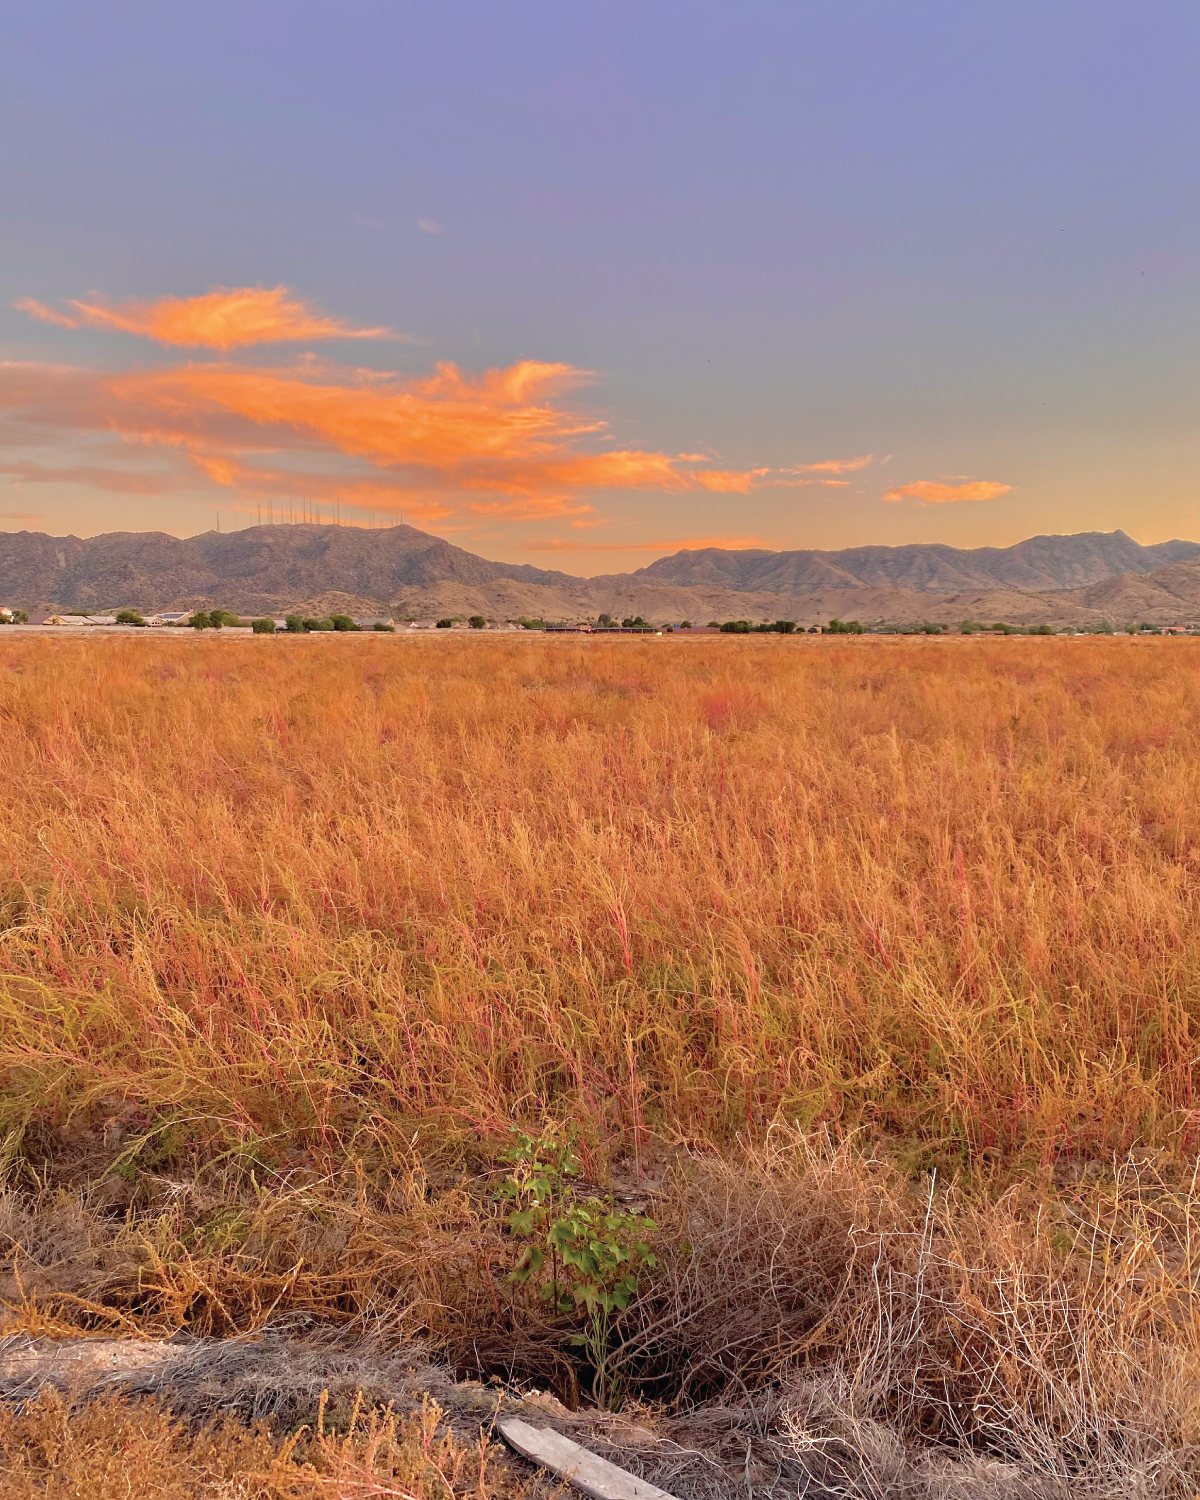 A field of grass and a mountain range in the background.